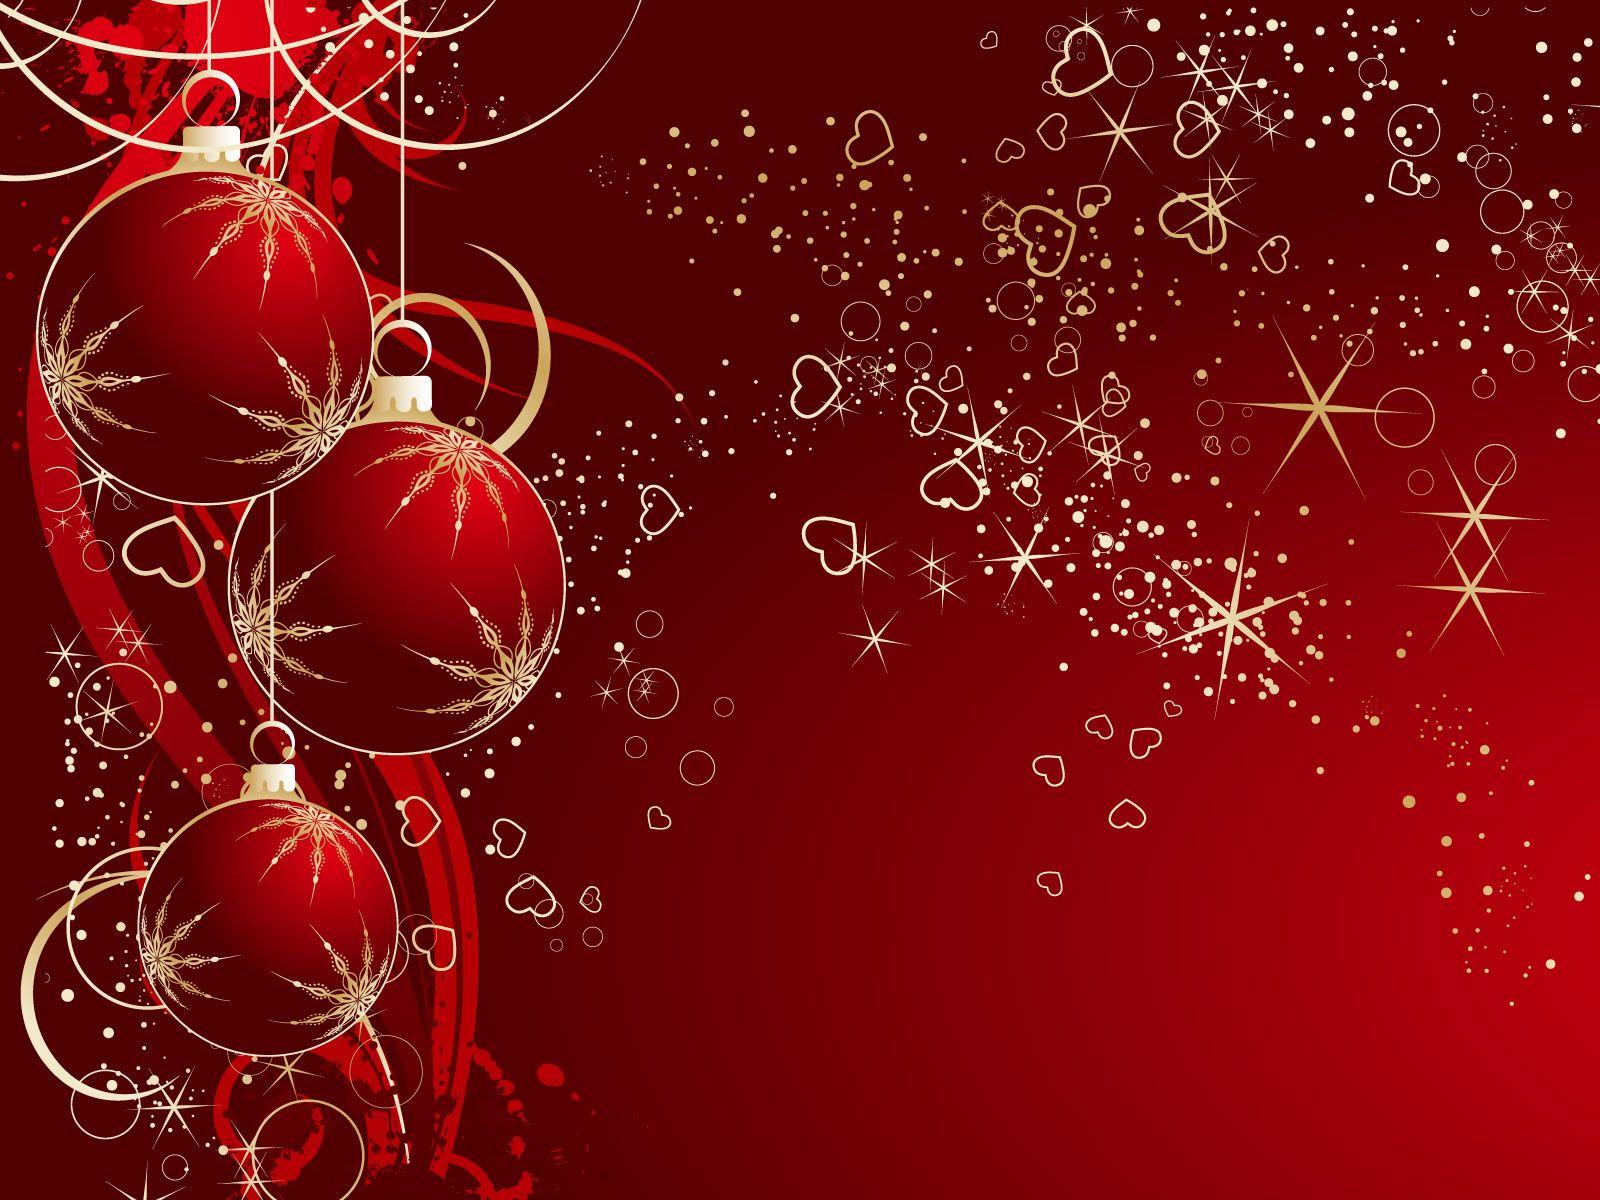 Free Christmas Wallpaper Background